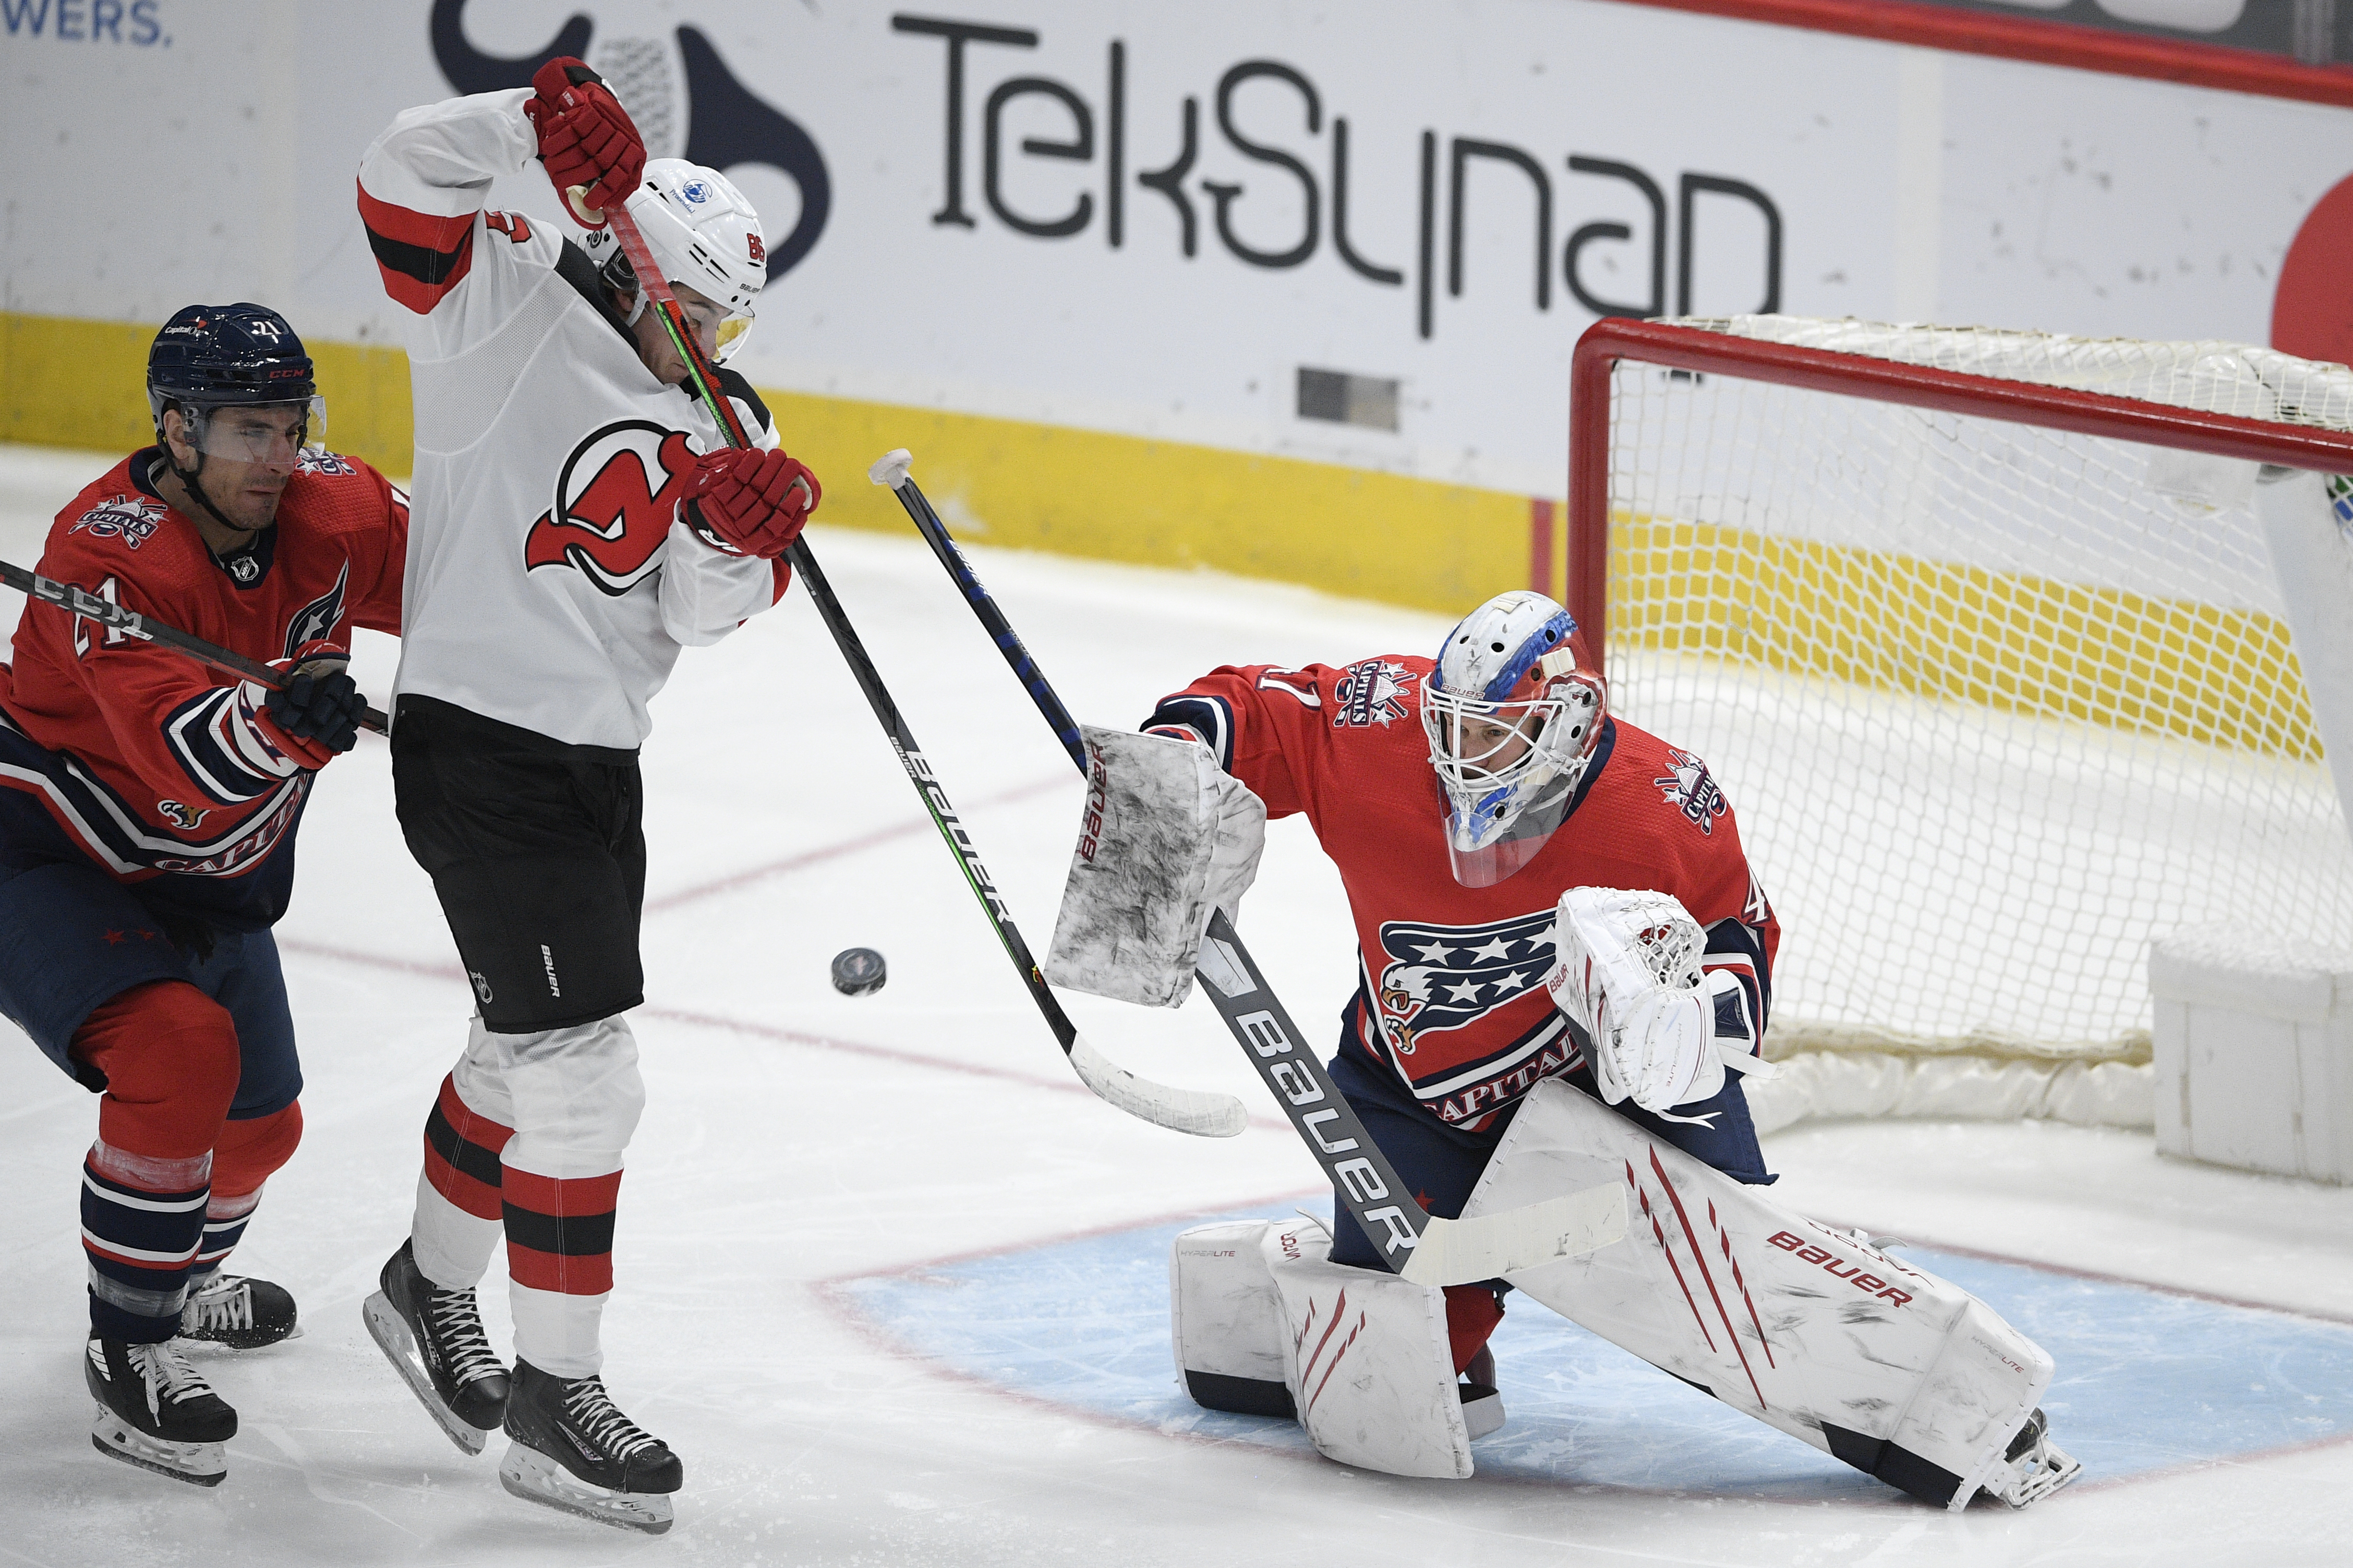 Yegor Sharangovich scores first NHL goal to lift Devils in OT